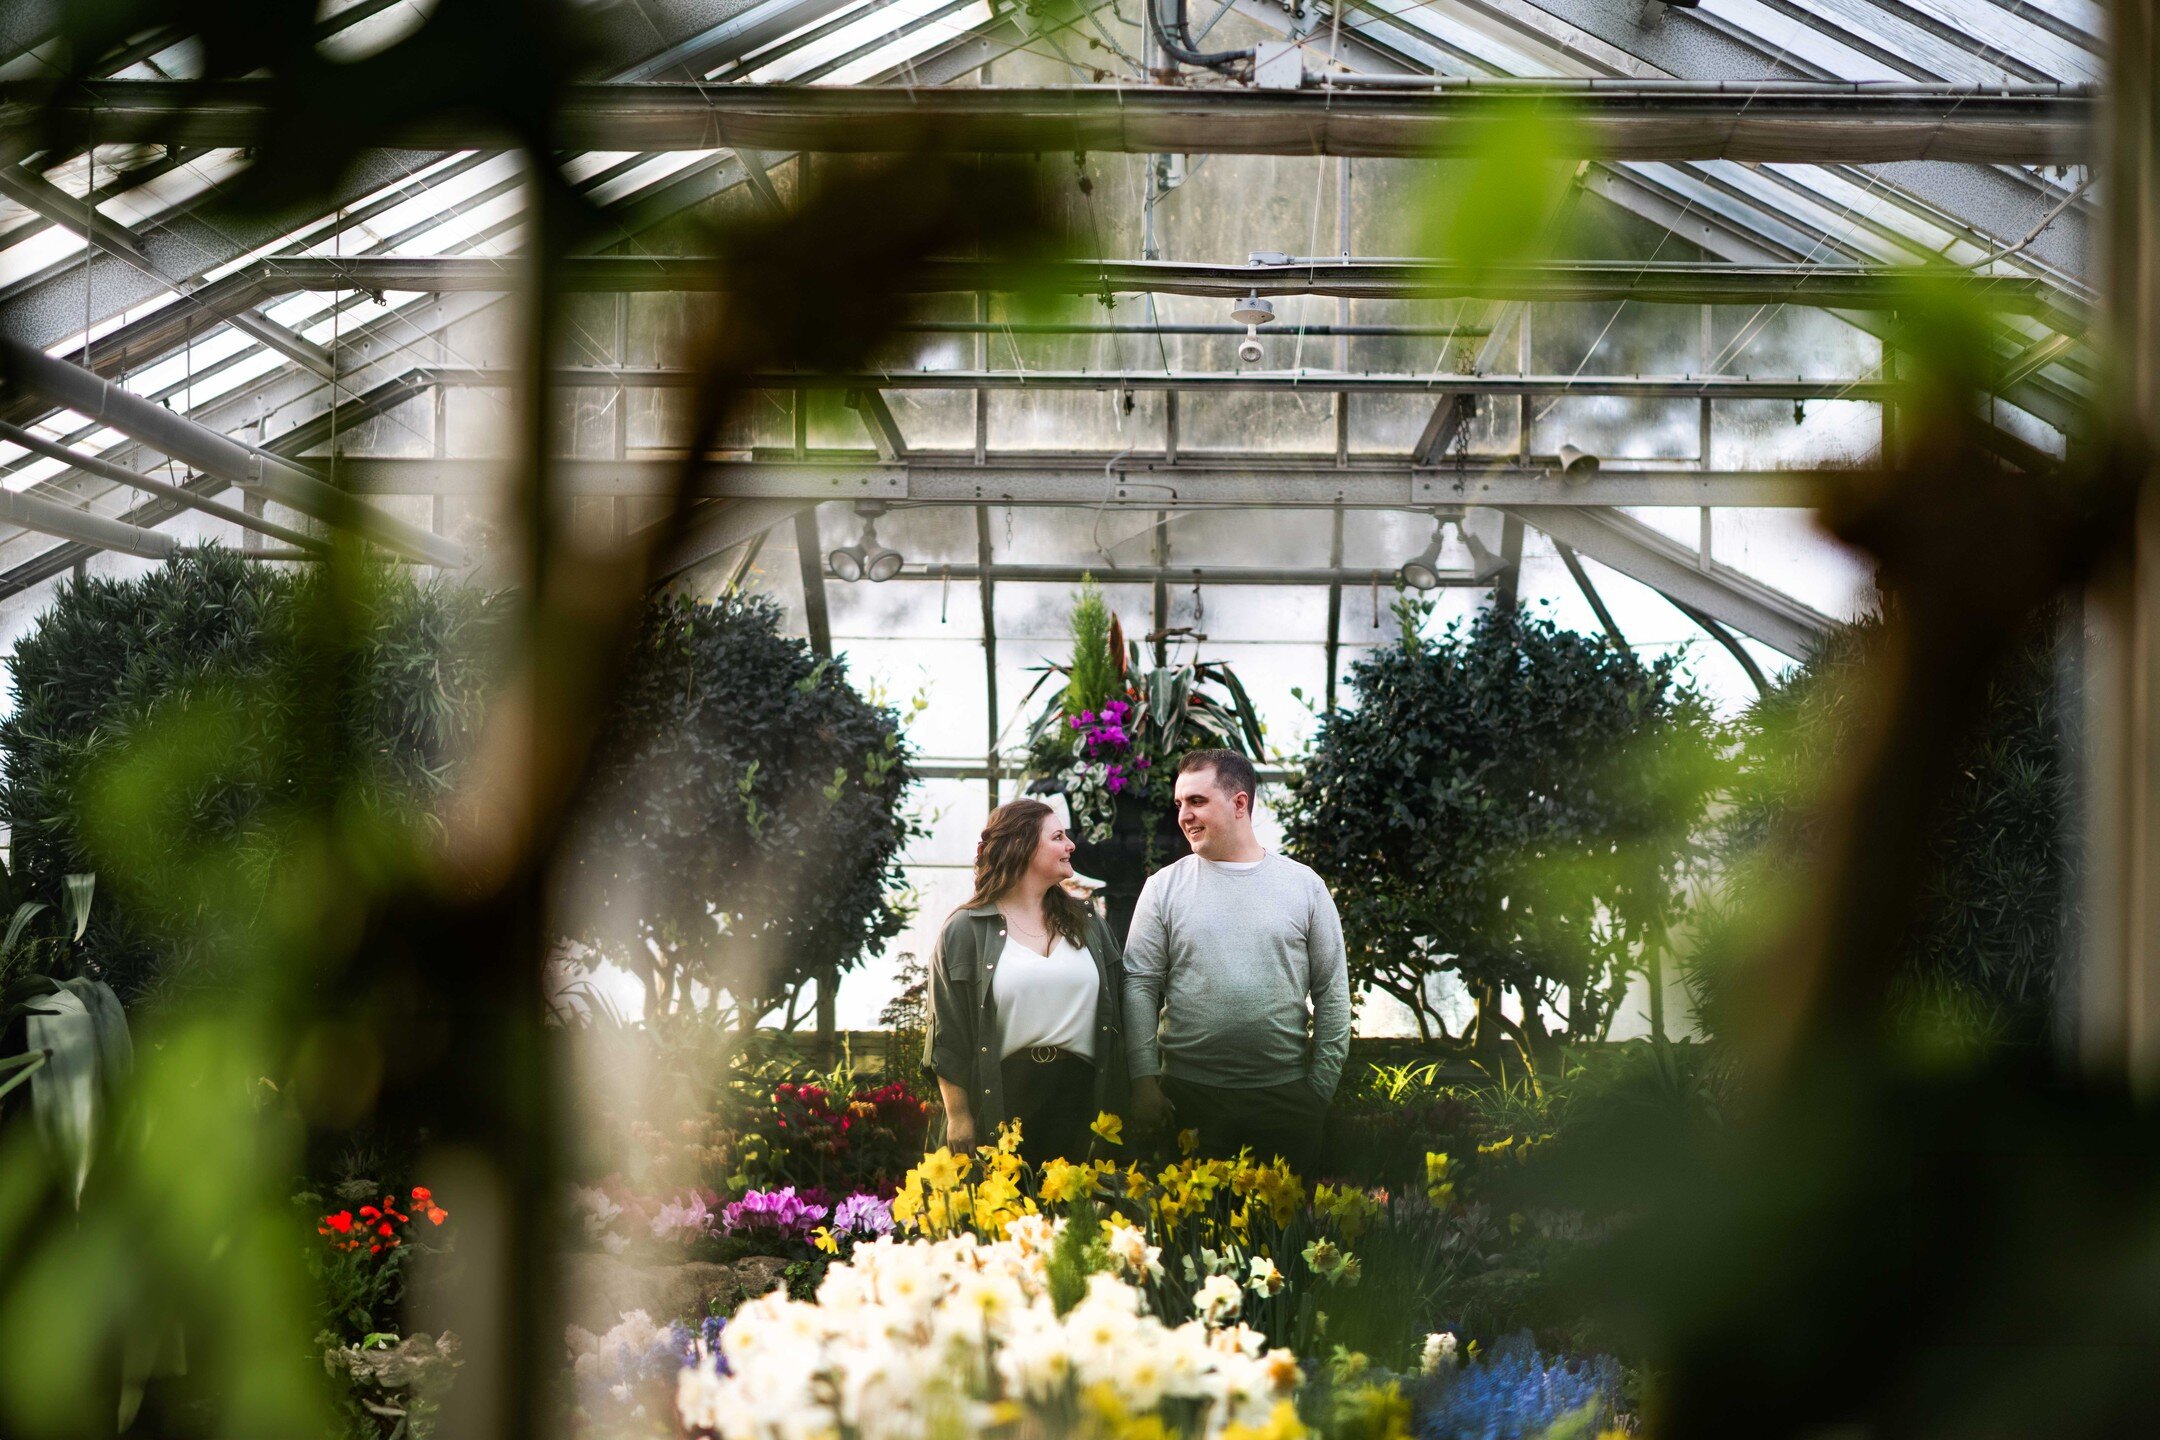 Celebrate love's beauty in full bloom! Brittany and Zach opted for a charming backdrop at the Centennial Park Conservatory in Etobicoke to capture their engagement 🌿 Amidst the urban oasis, their engagement session exuded a refreshing touch of sprin